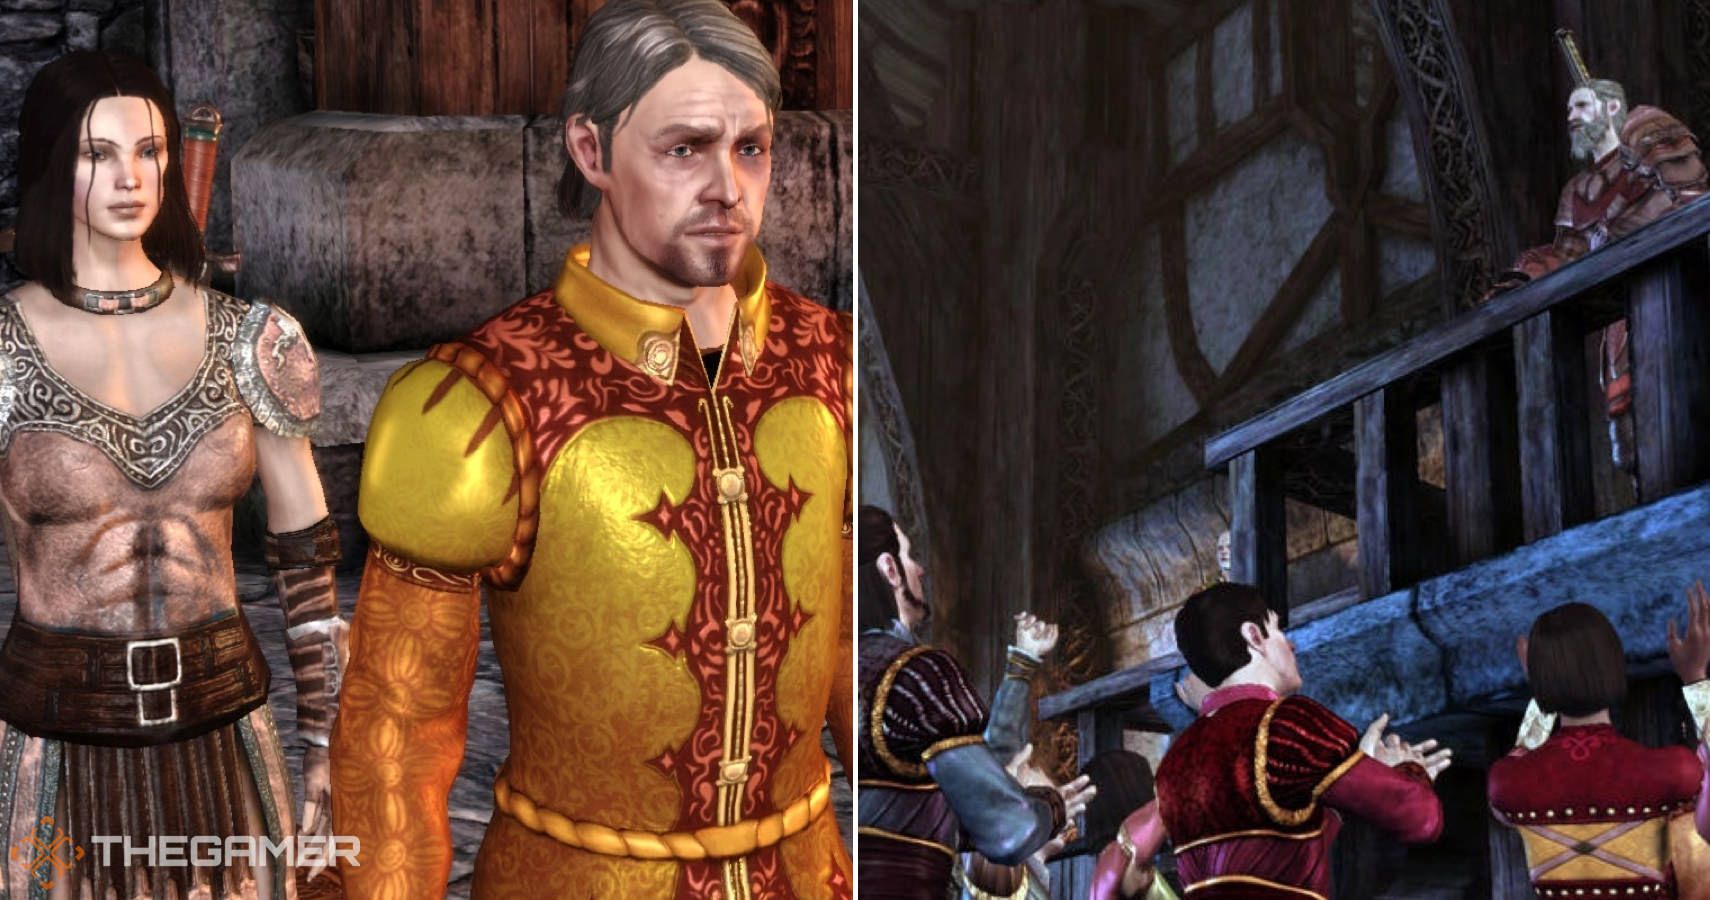 A gift   Dragon age origins, Dragon age  games, Dragon age characters